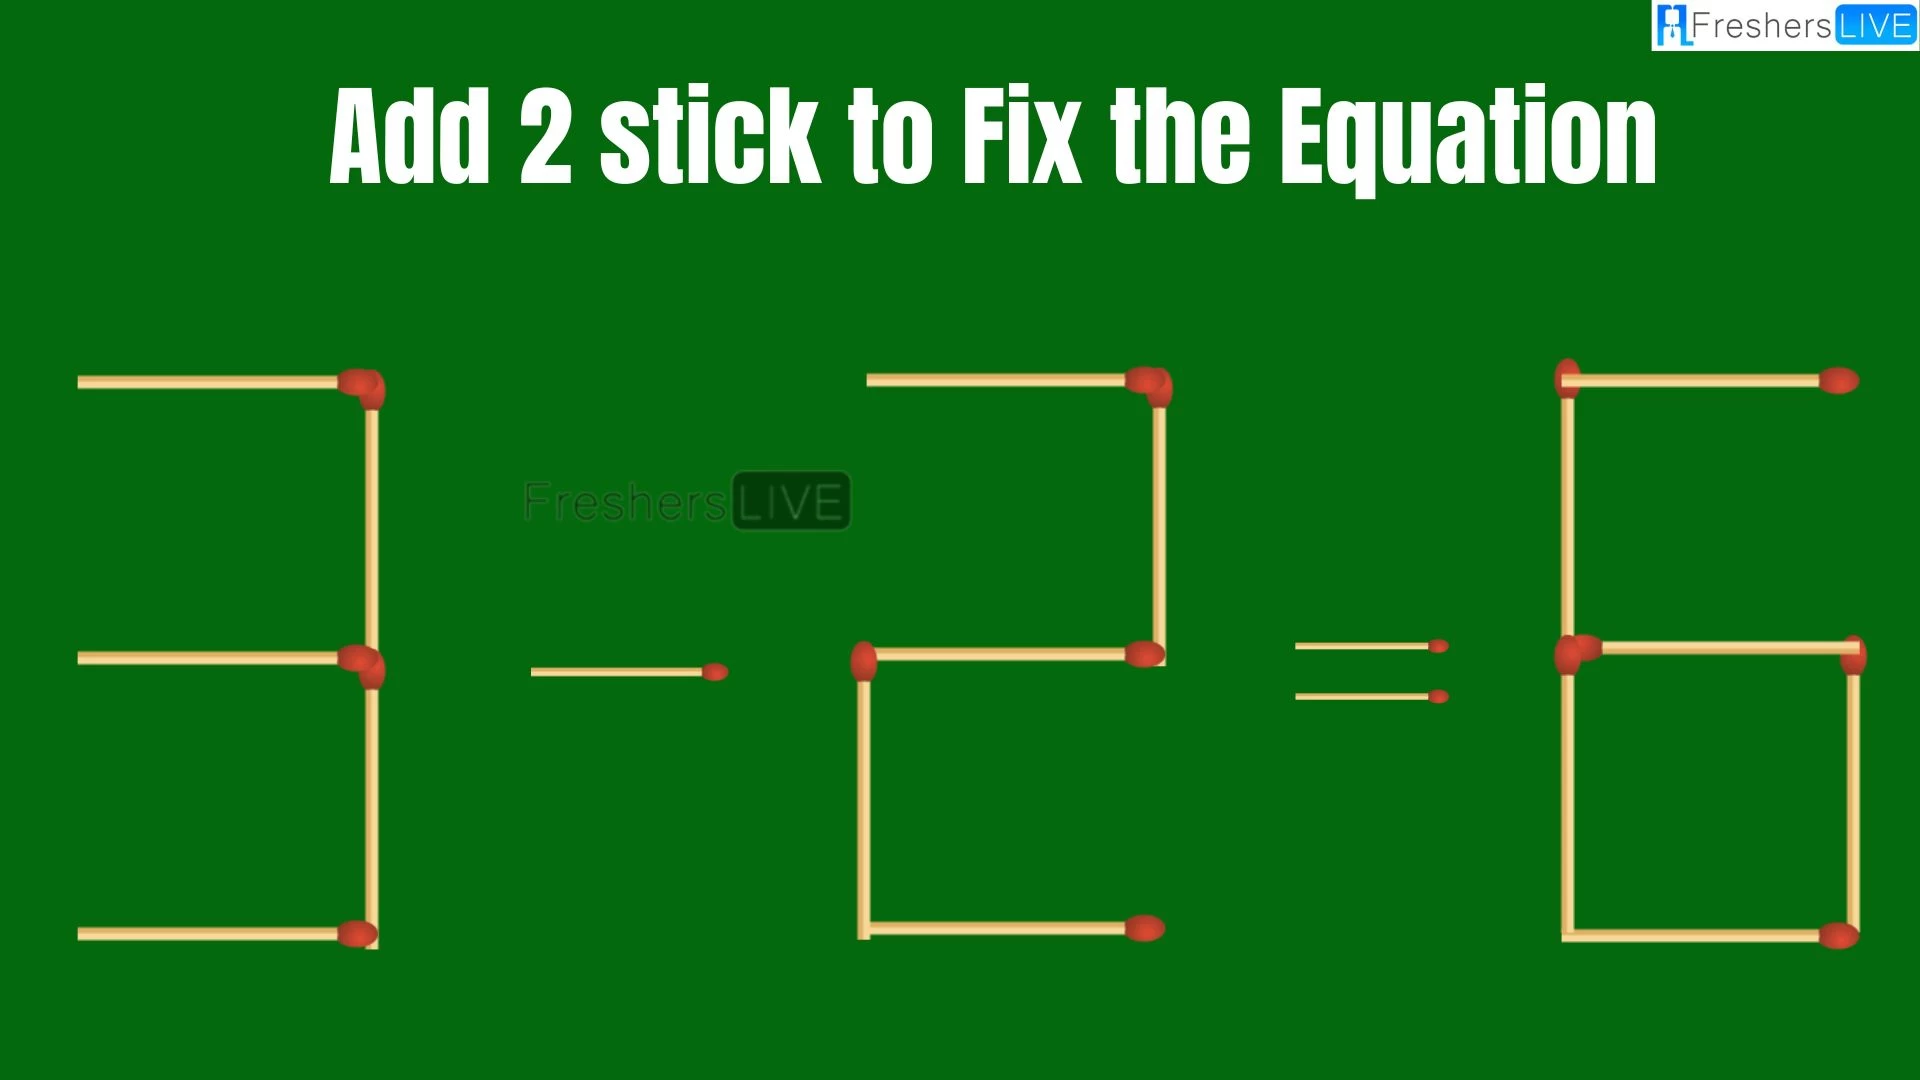 Solve the Puzzle to Transform 3-2=6 by Adding 2 Matchsticks to Correct the Equation